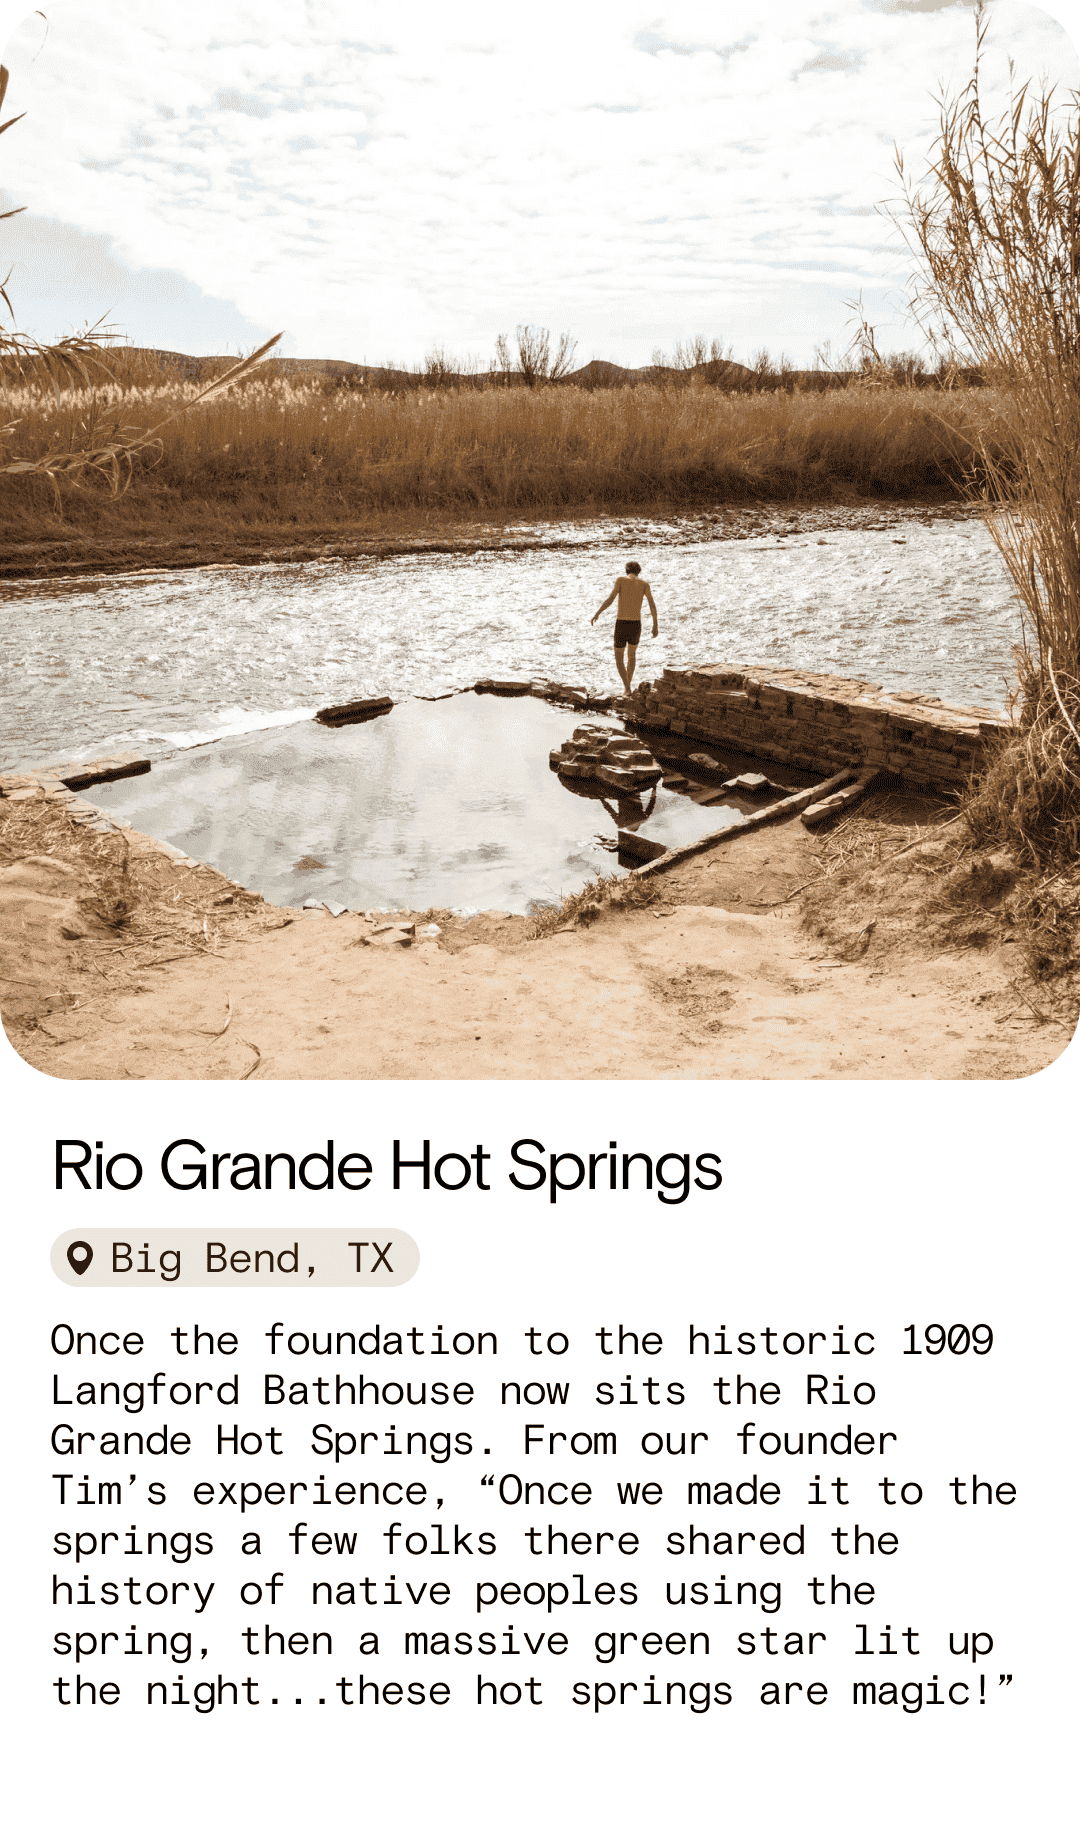 Rio Grande Hot Springs Big Bend, TX Once the foundation to the historic 1909 Langford Bathhouse now sits the Rio Grande Hot Springs. From our founder Tim’s experience, “Once we made it to the springs a few folks there shared the history of native peoples using the spring, then a massive green\xa0star lit up the night...these hot springs are magic!”